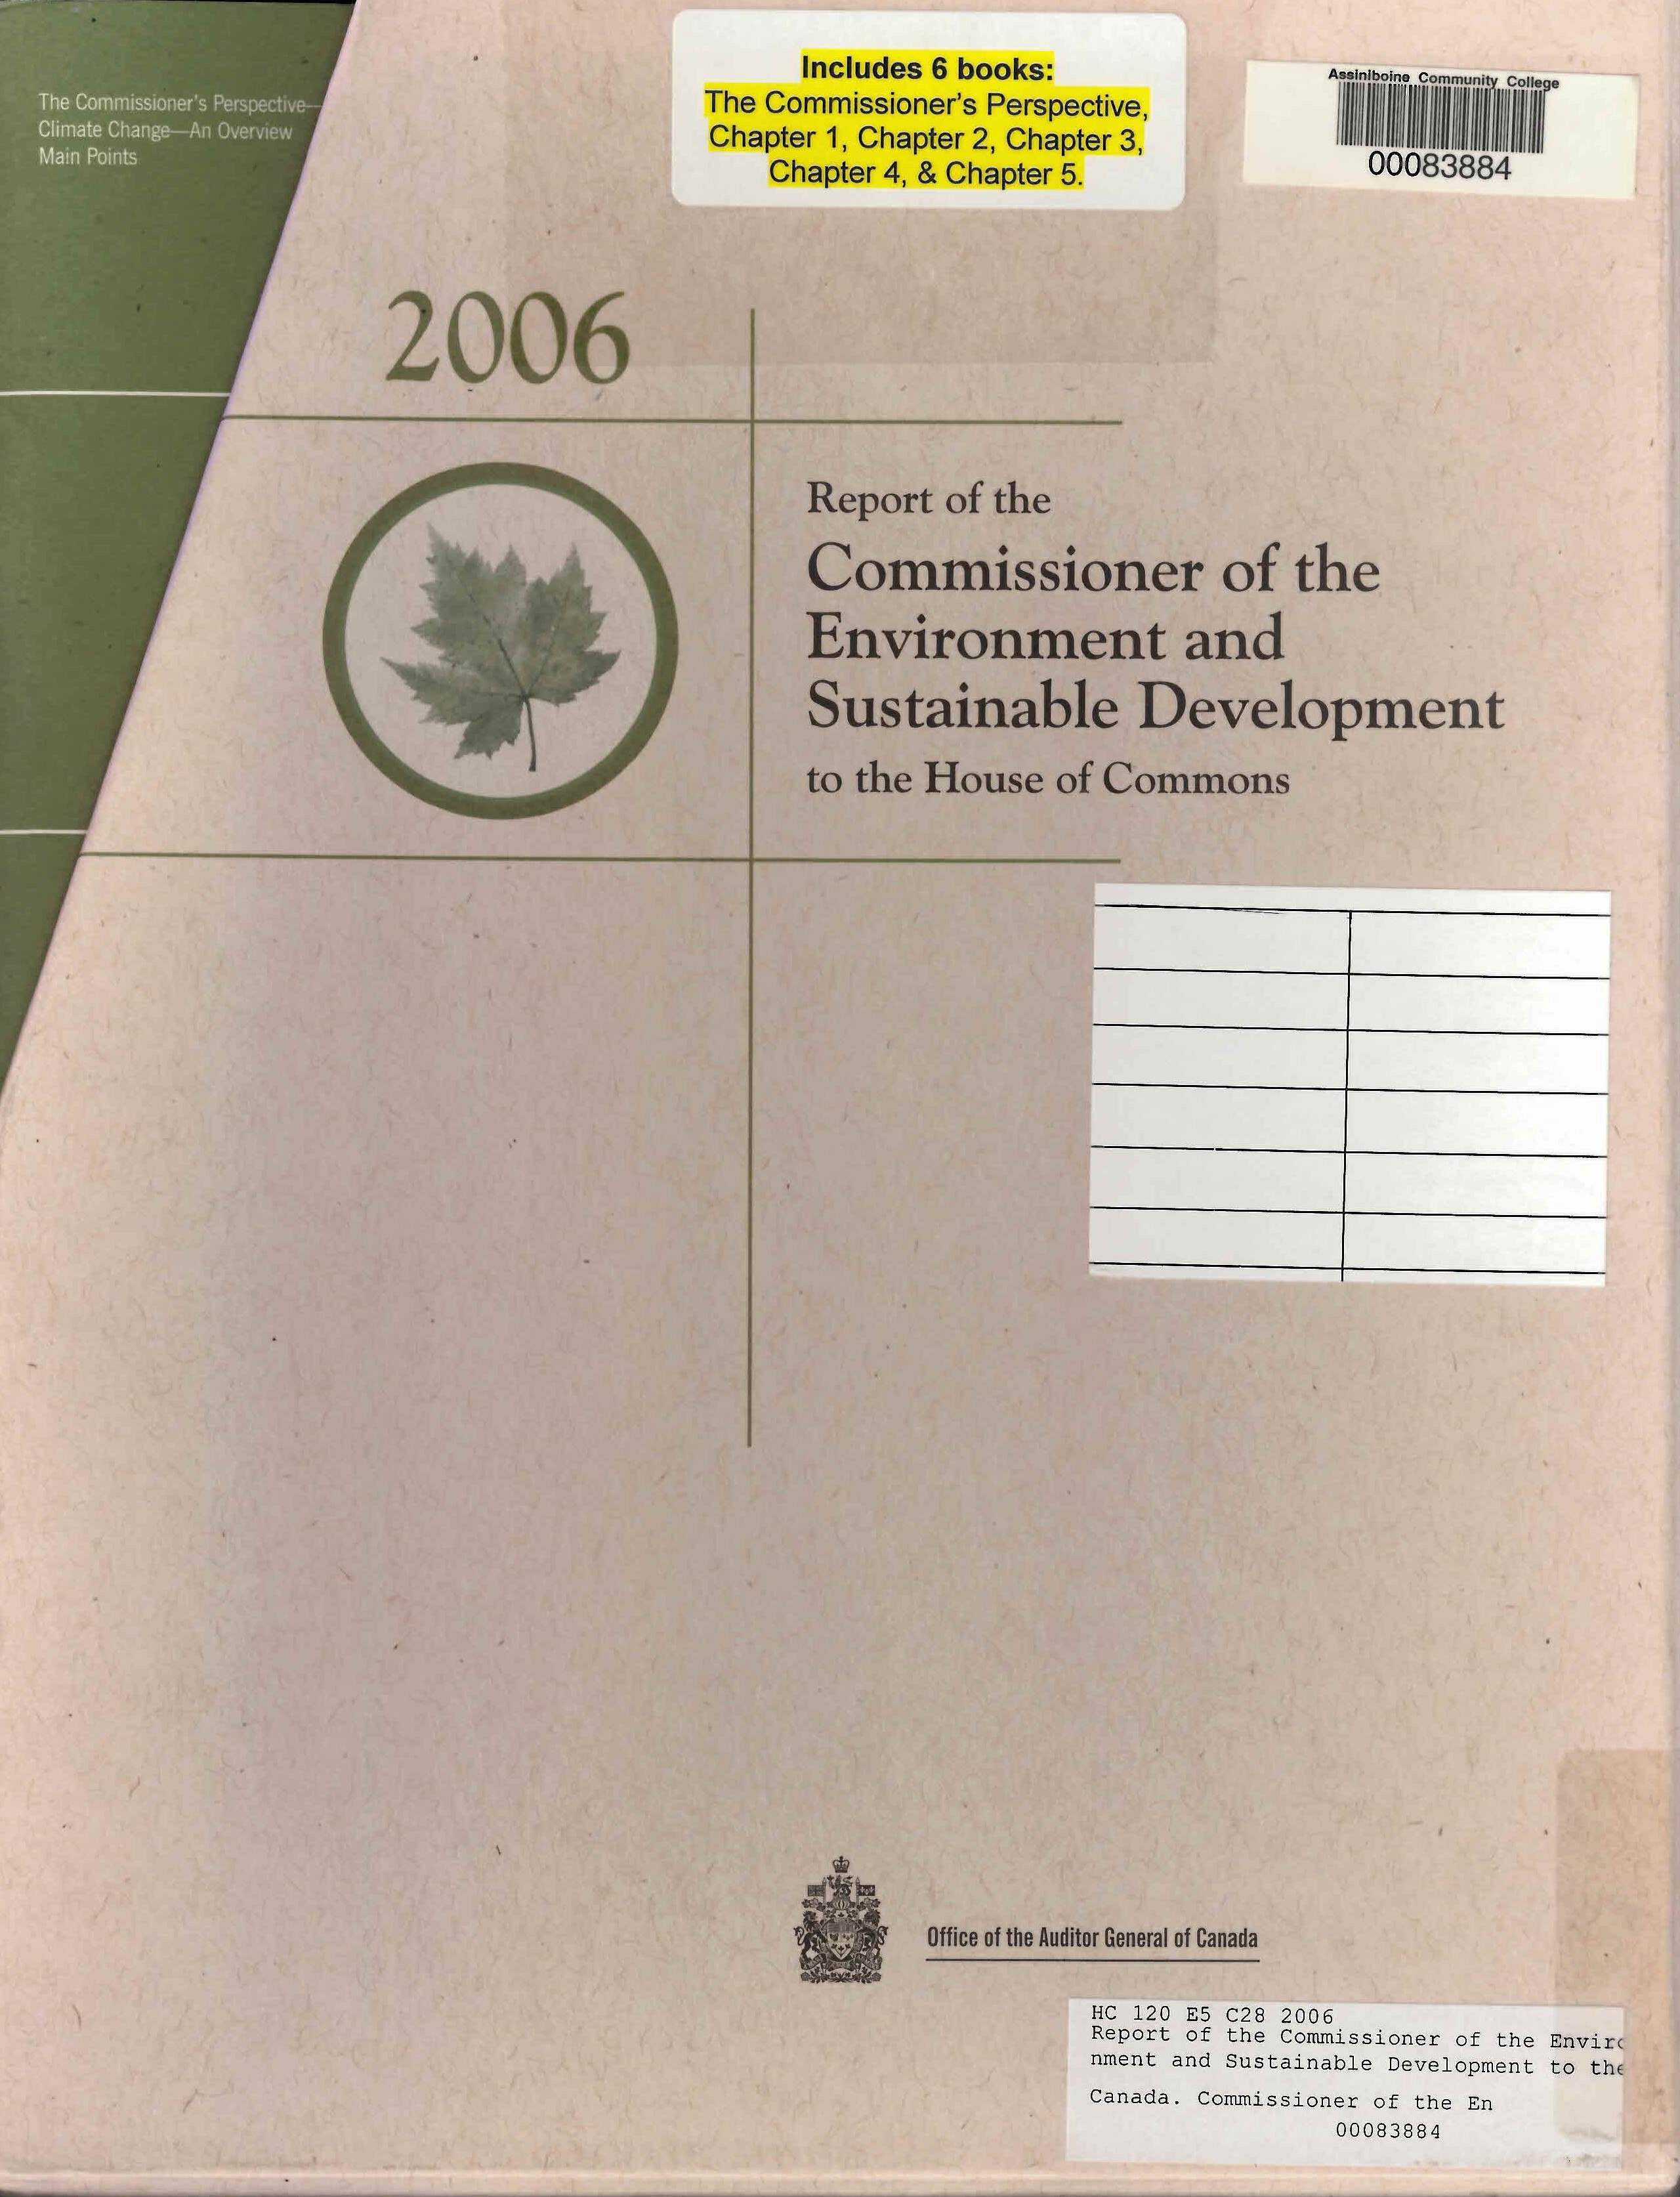 Report of the Commissioner of the Environment and Sustainable Development to the House of Commons.